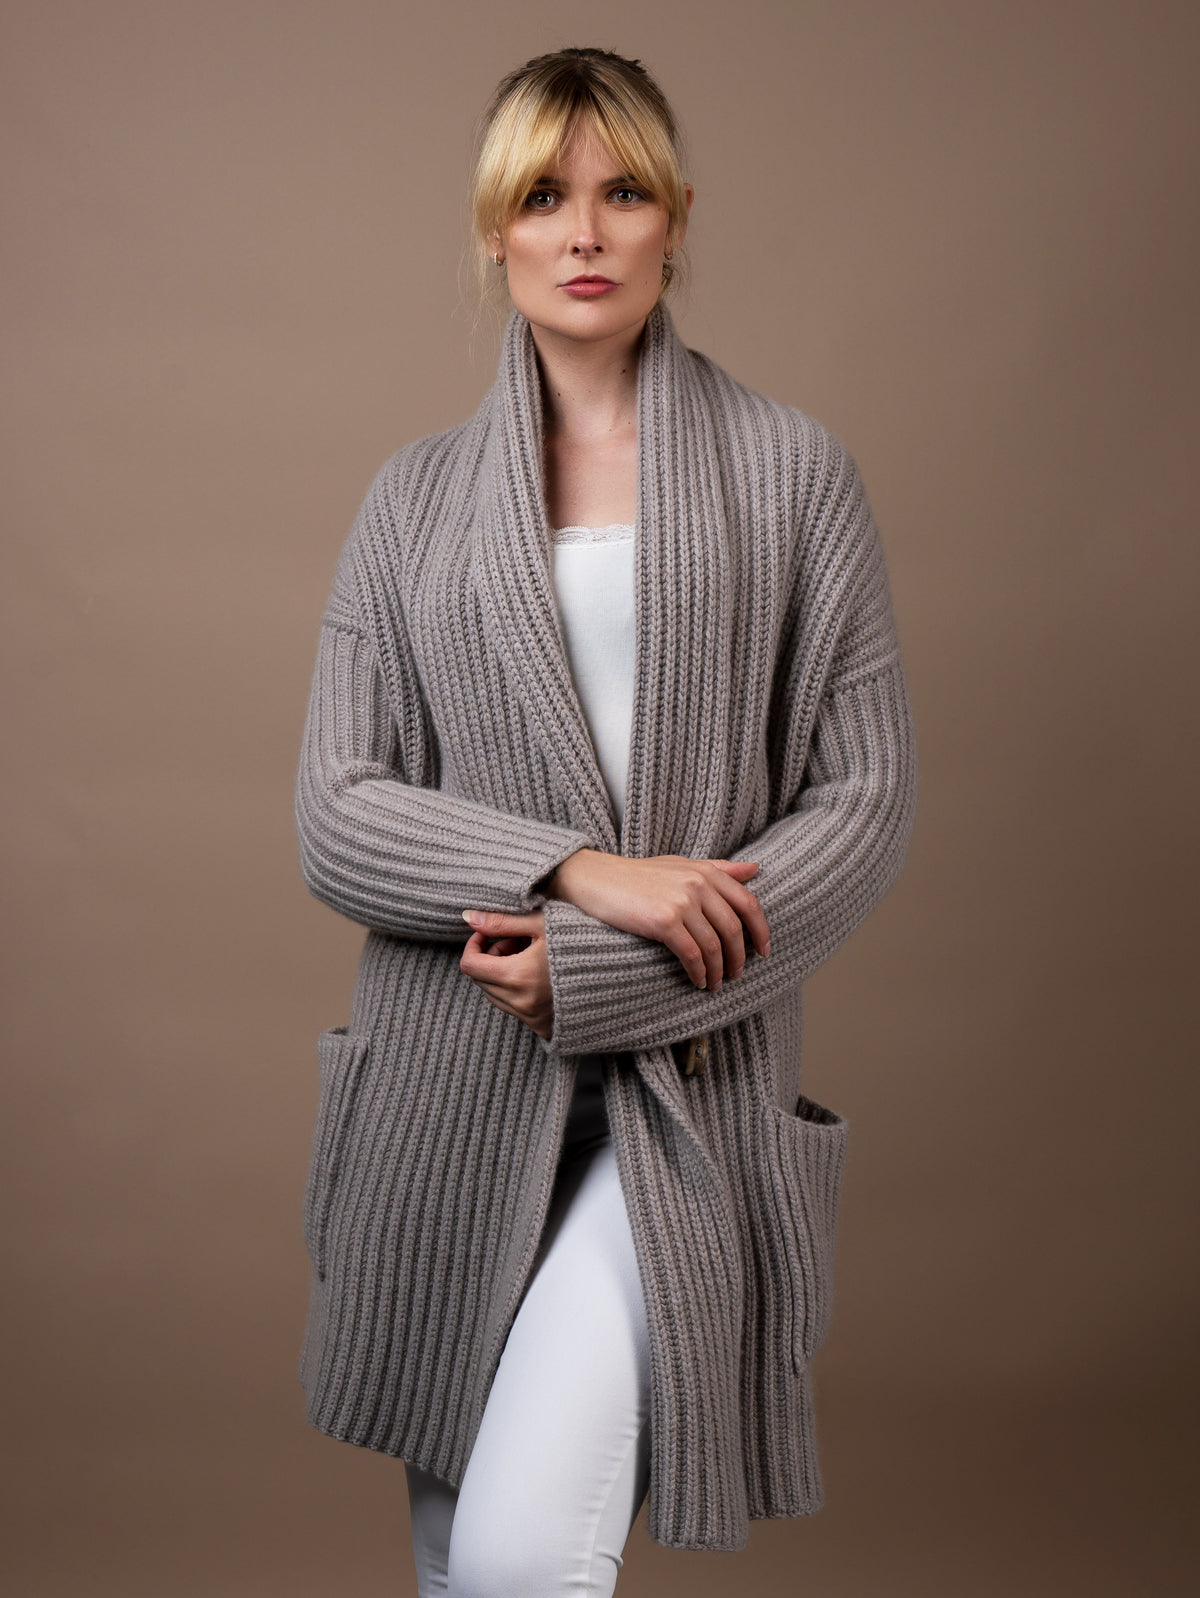 Ladies Cashmere Shawl Cardigan Wrap Jumper in mushroom. 100% cashmere handmade under the Royal Warrant in the UK. This is Cashmere at it&#39;s finest. 